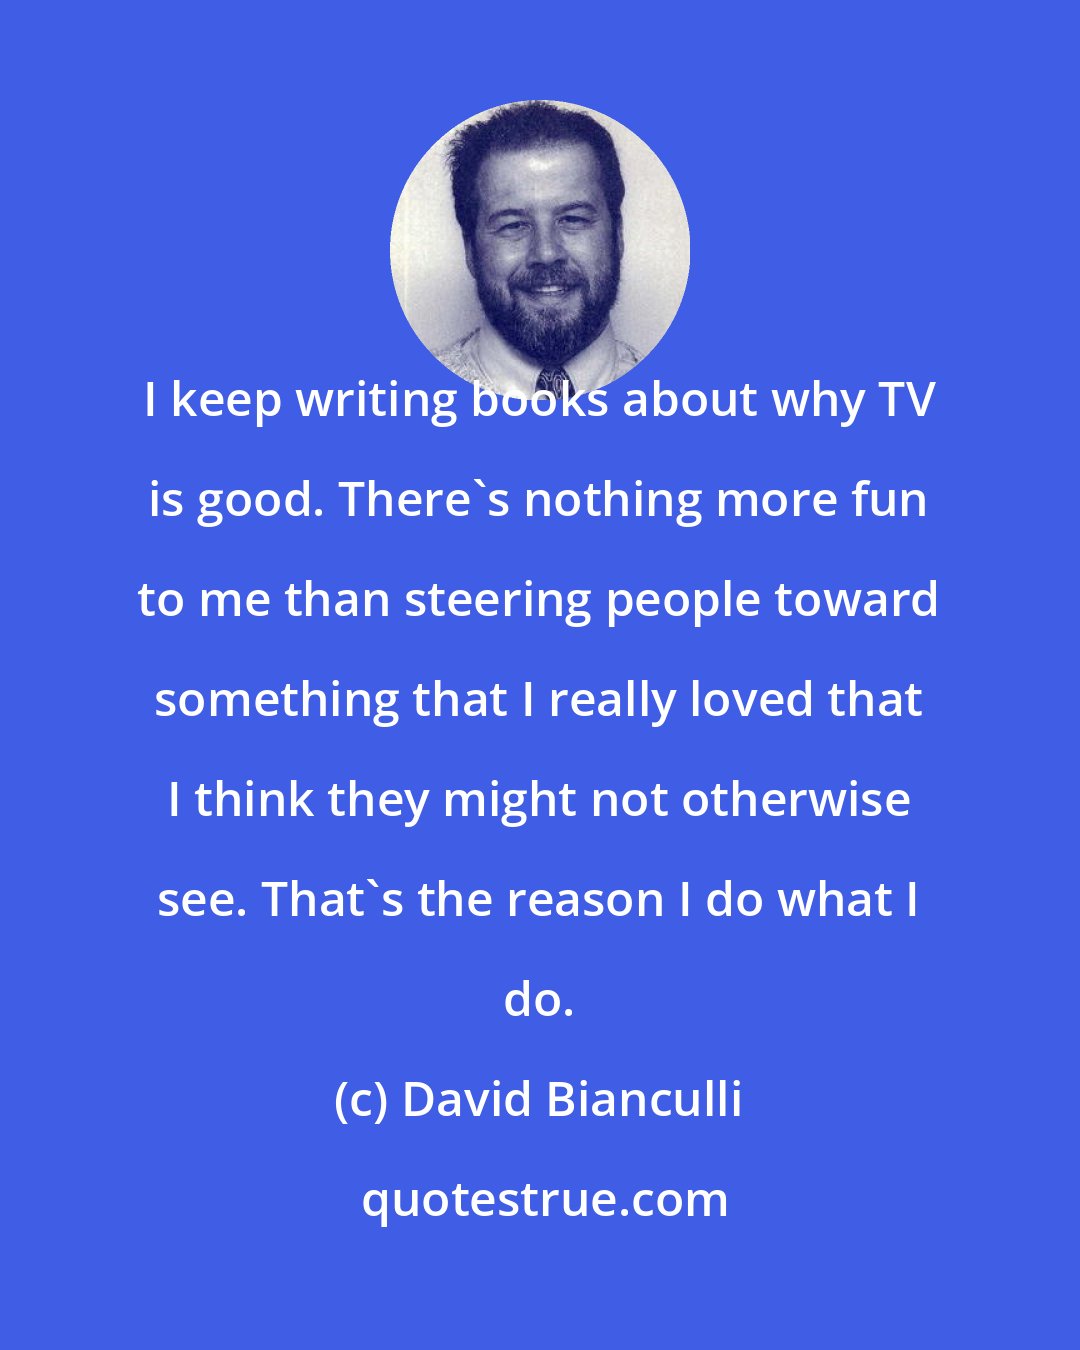 David Bianculli: I keep writing books about why TV is good. There's nothing more fun to me than steering people toward something that I really loved that I think they might not otherwise see. That's the reason I do what I do.